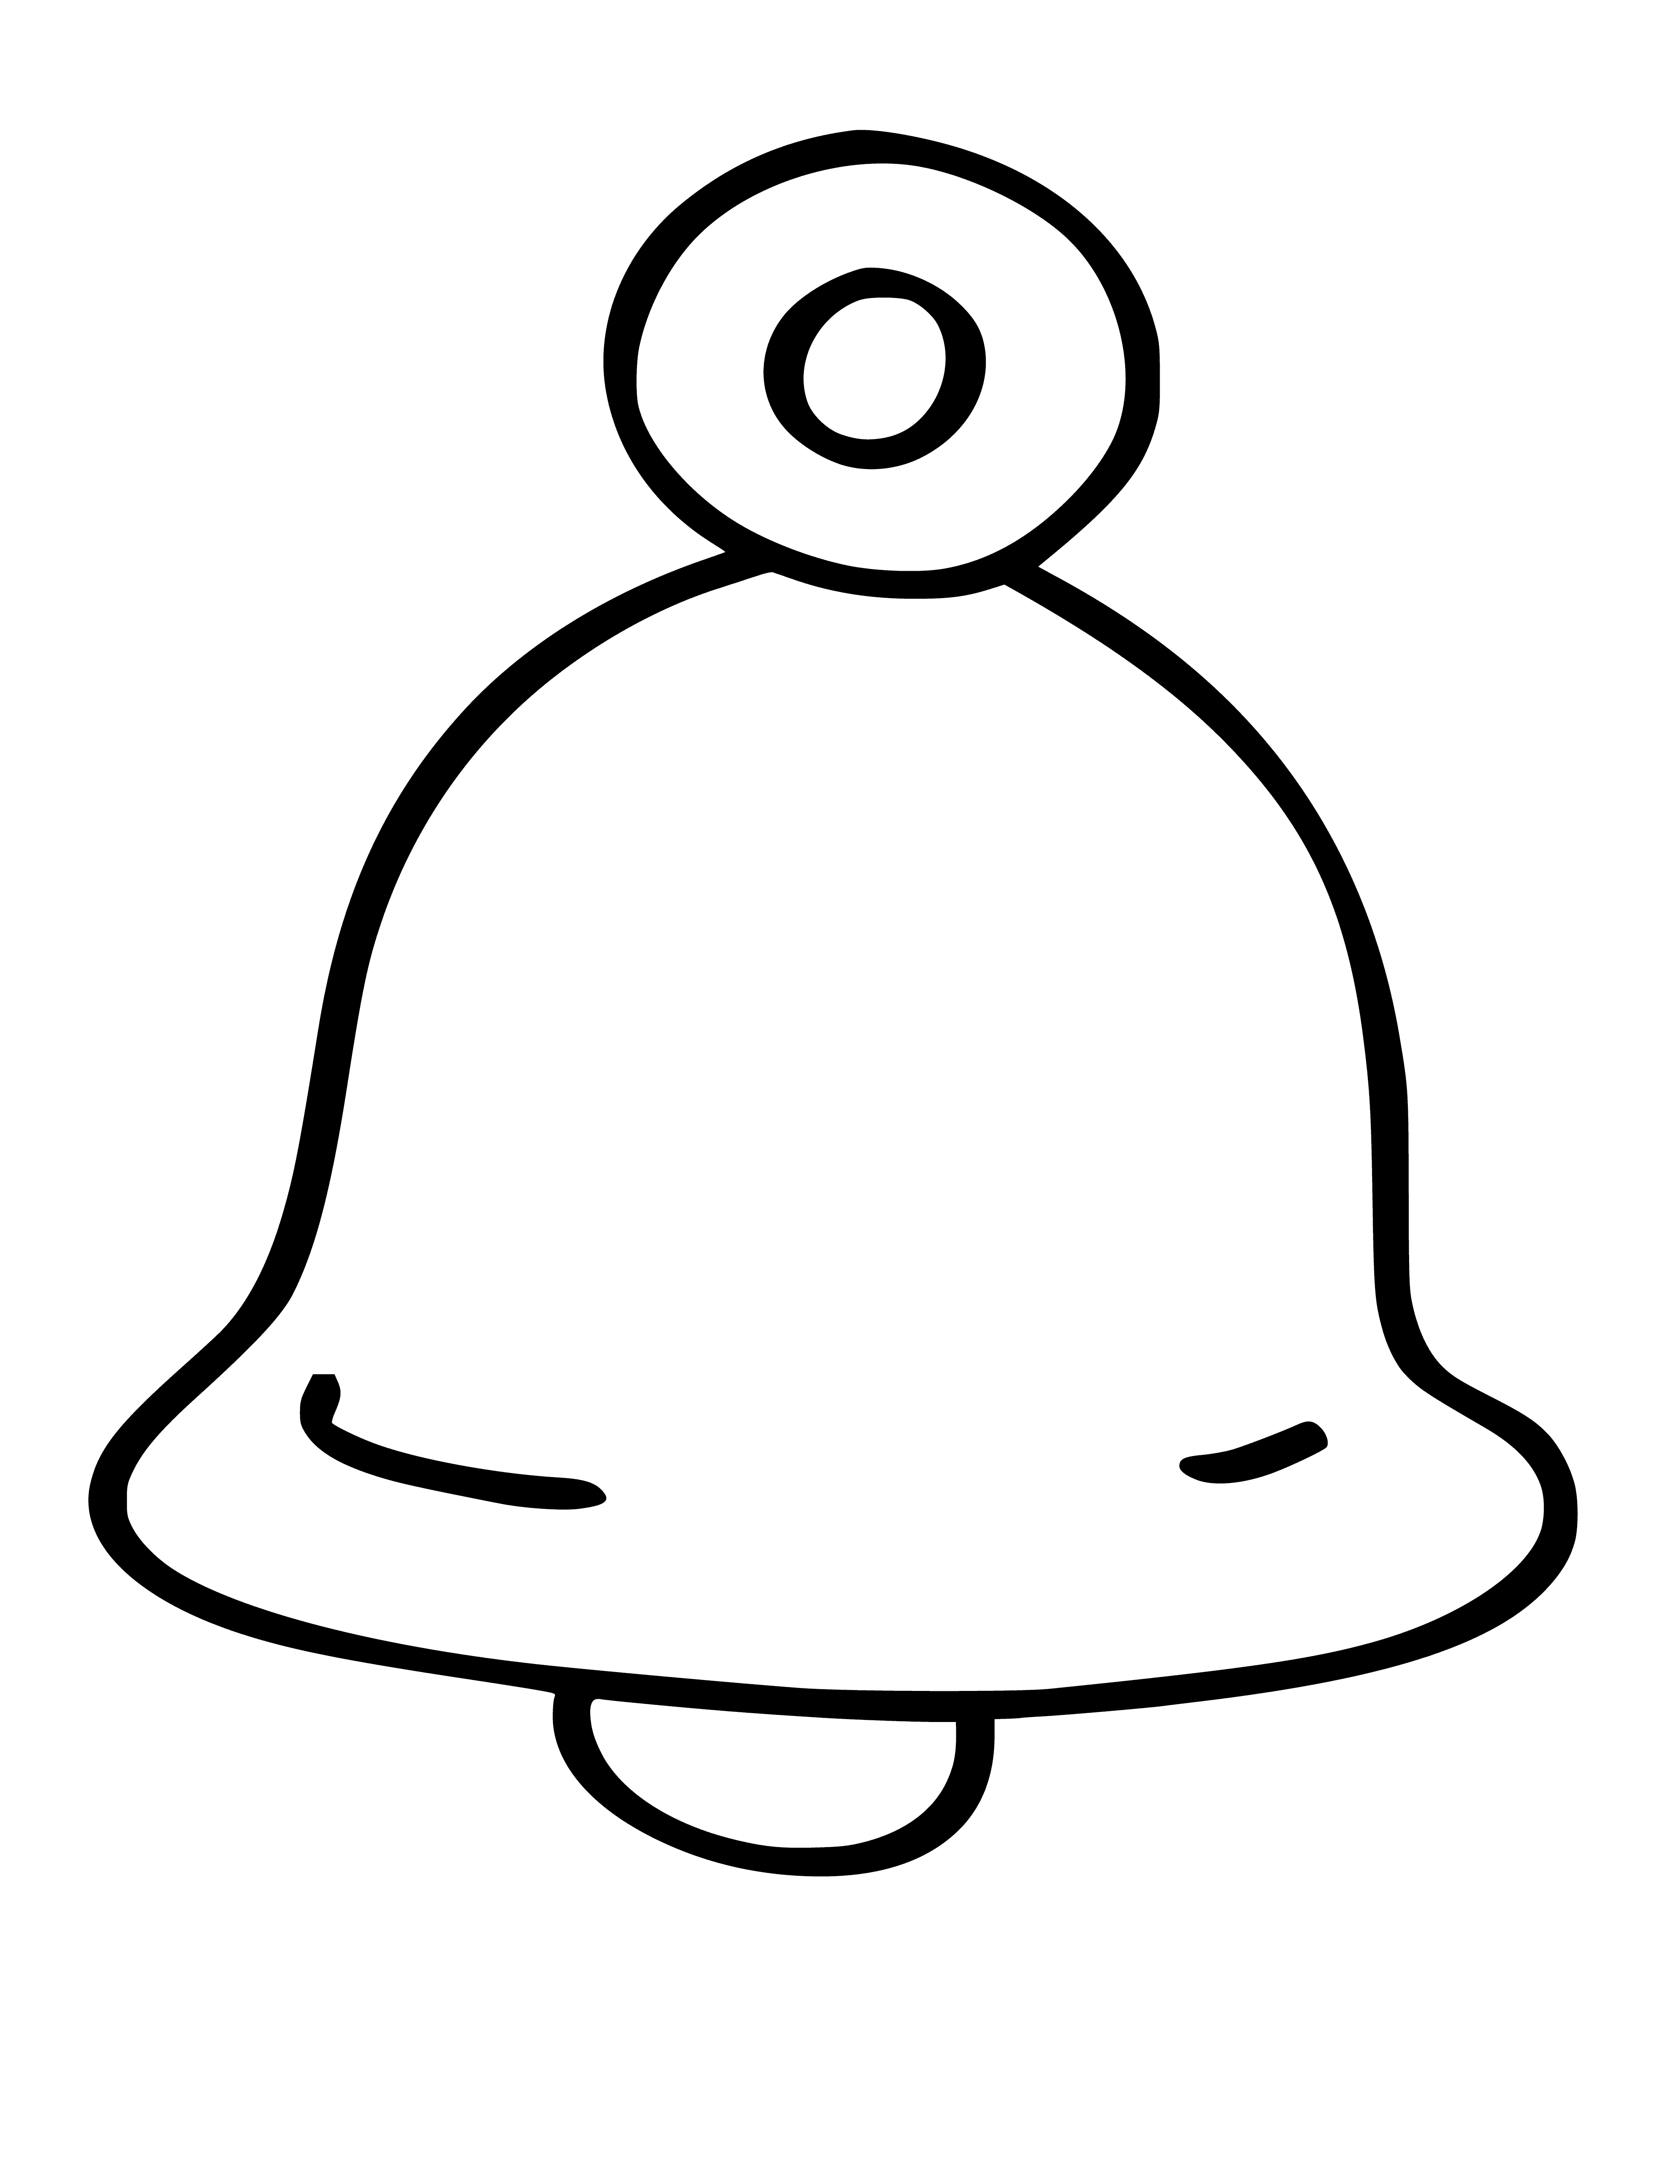 coloring page: A large red bell with triangle top & curved body is surrounded by a green circle. 3 green flowers near bottom & 2 yellow stars near top.